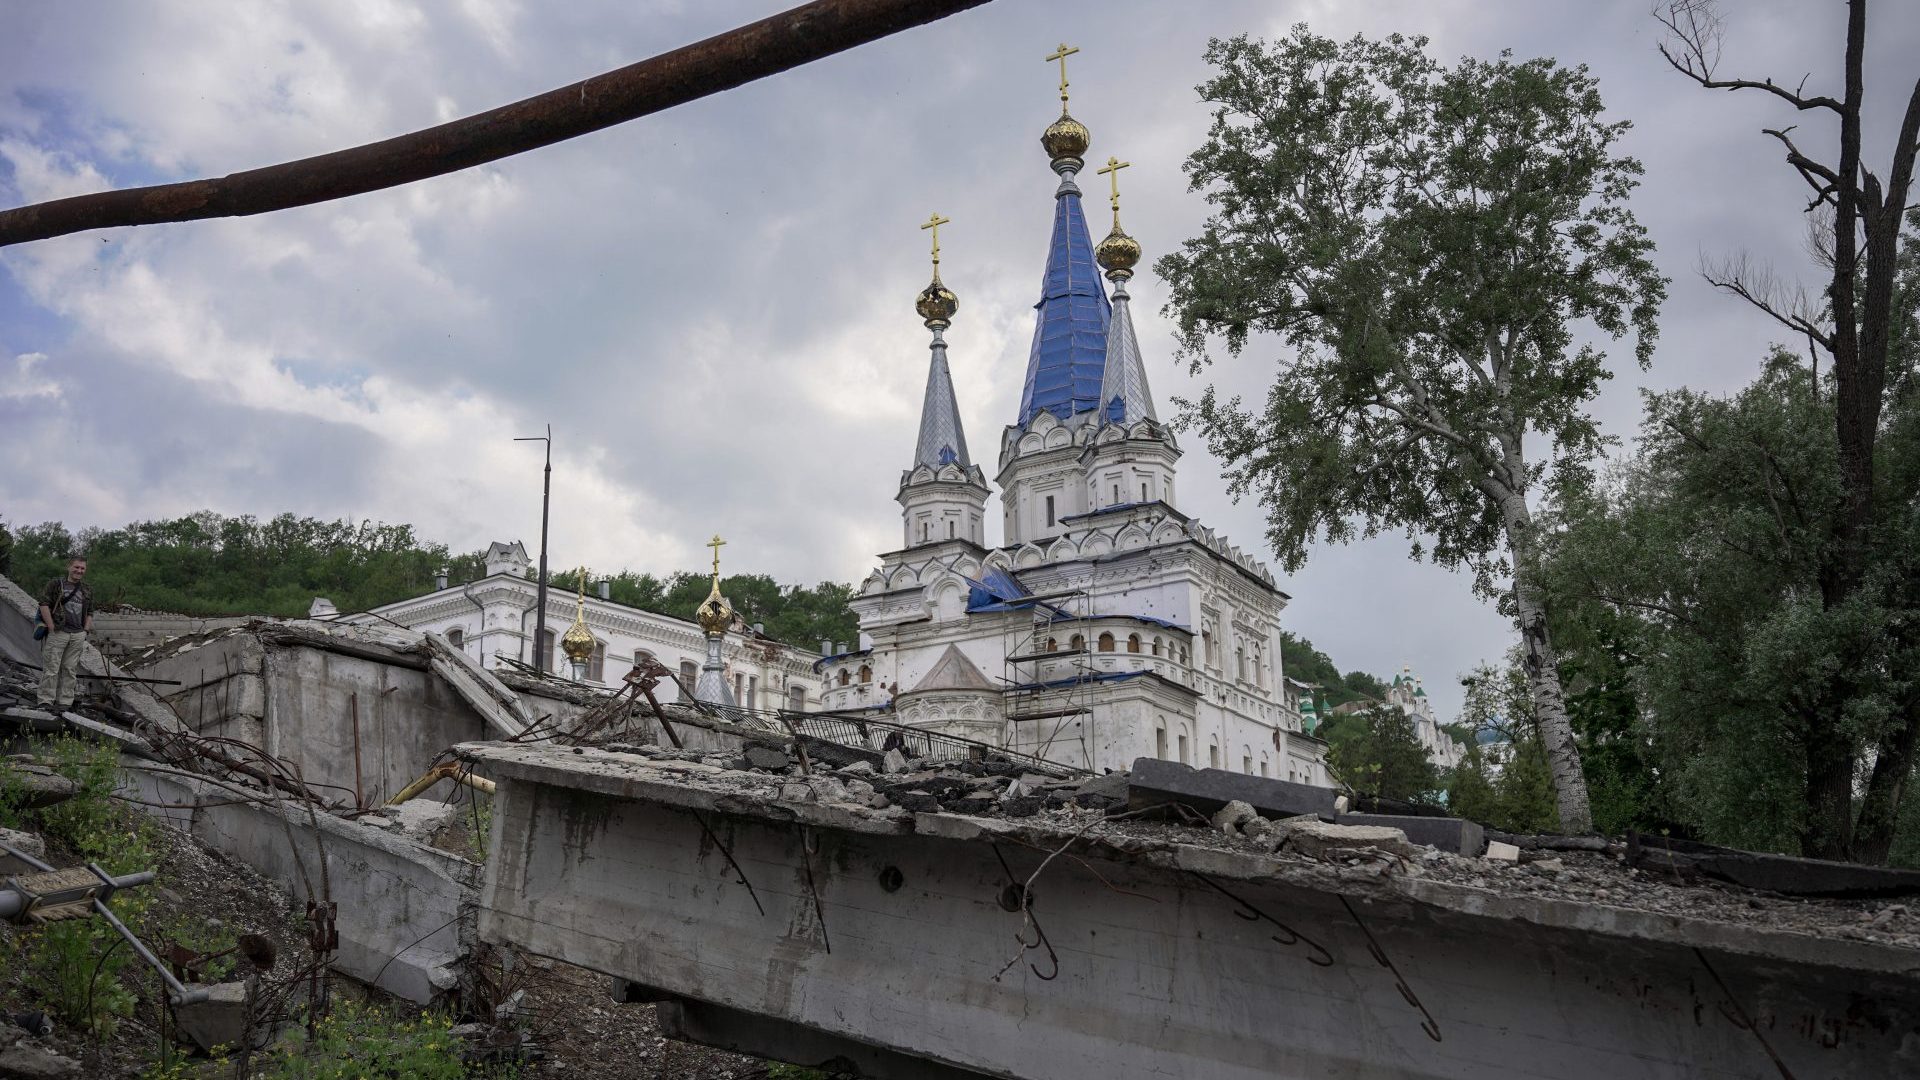 A destroyed bridge near a monastery in the ruined town of Sviatohirsk in Ukraine's Donbas Region. Until Ukraine's army liberated the city just a few months ago, it was occupied by Russian forces. Photo: Mihir Melwani/SOPA Images/LightRocket via Getty Images